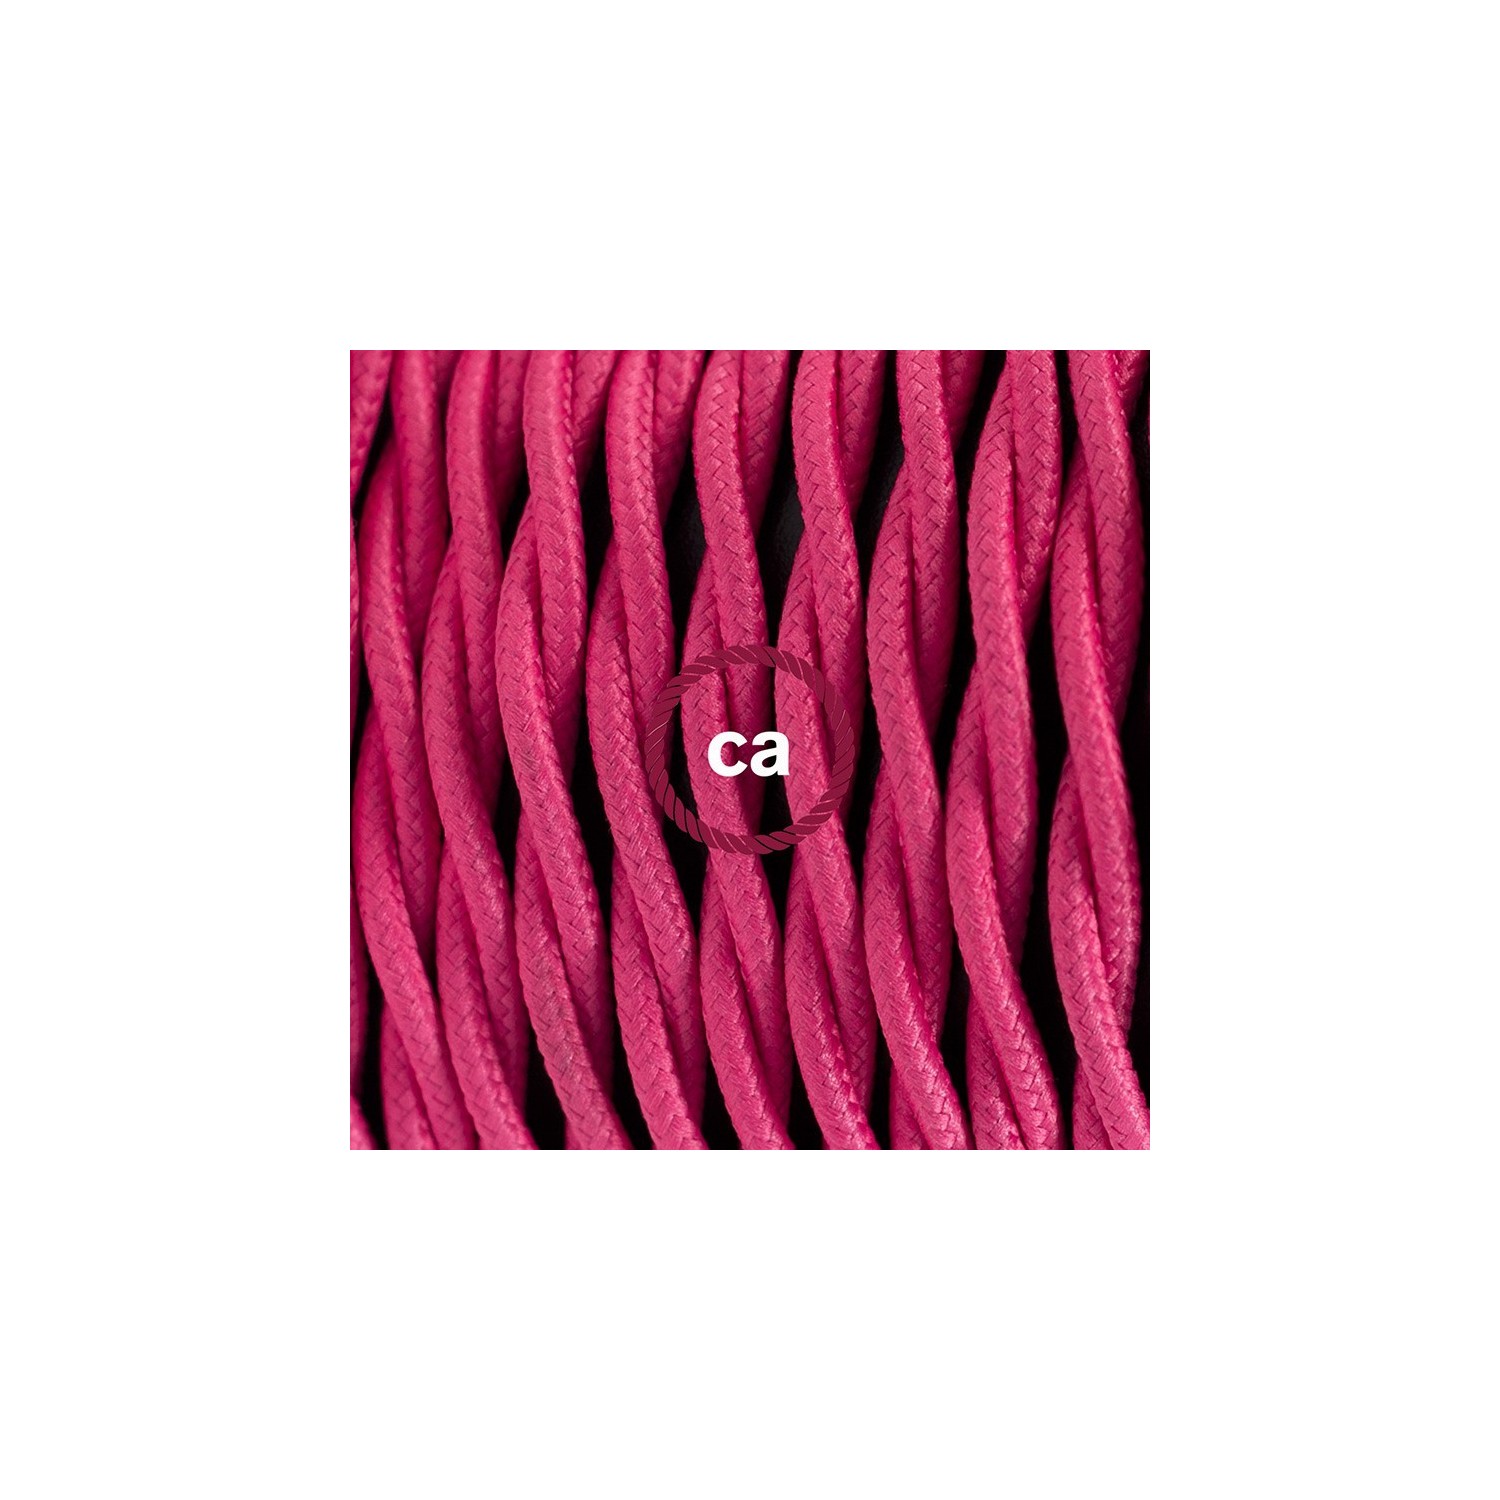 Create your TM08 Fuchsia Rayon Snake and bring the light wherever you want.